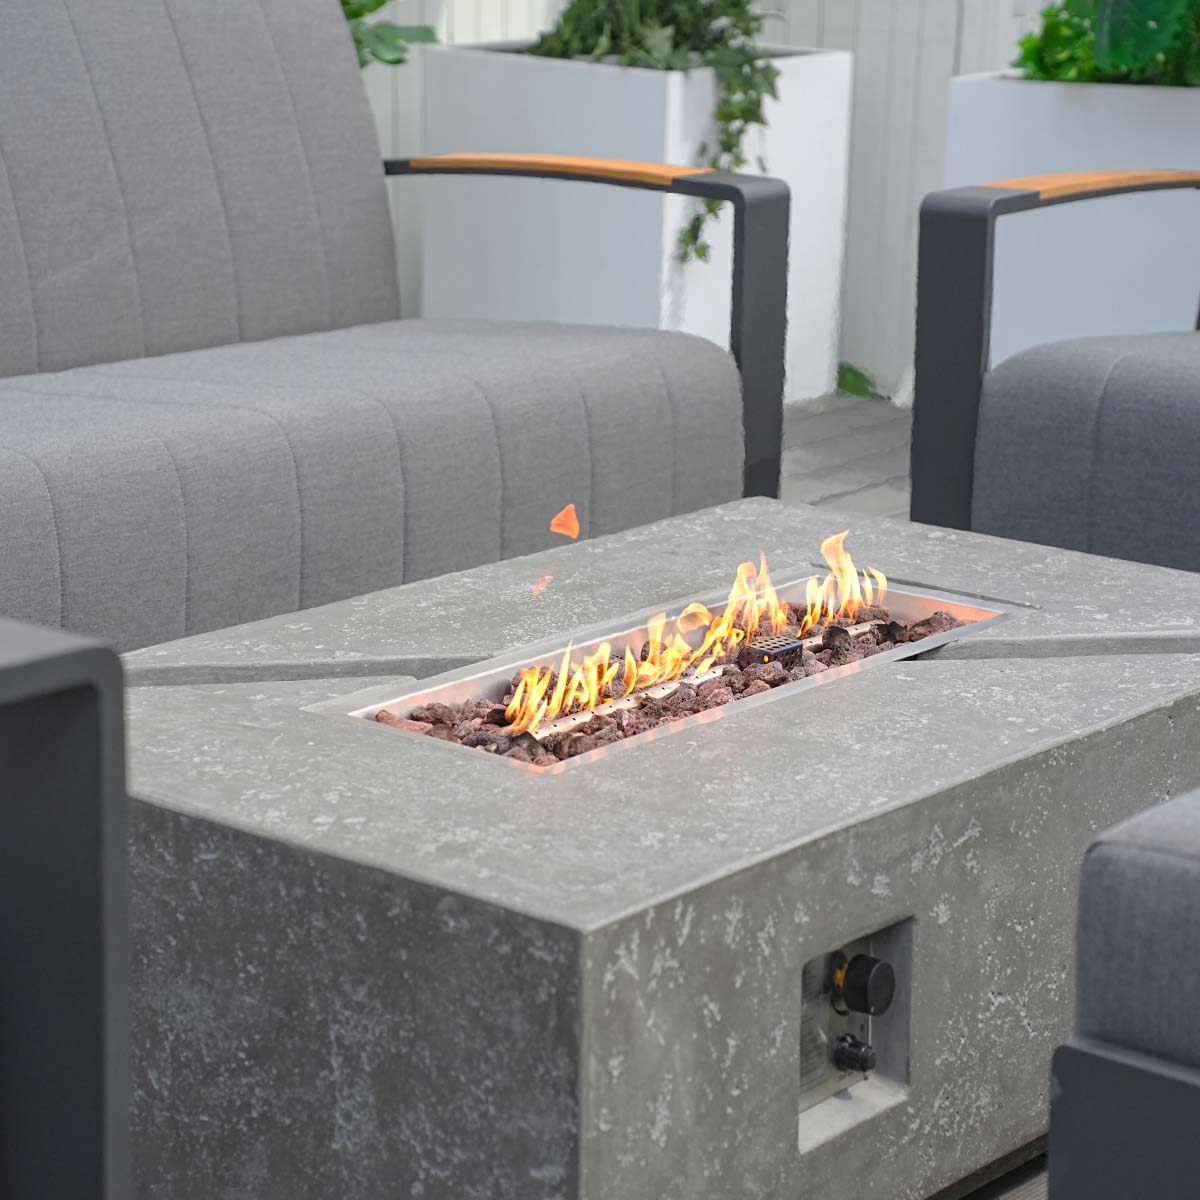 The latest furniture on the market - Abrihome 6-Pieces Patio Garden Aluminum Seating Set with Fire Pit